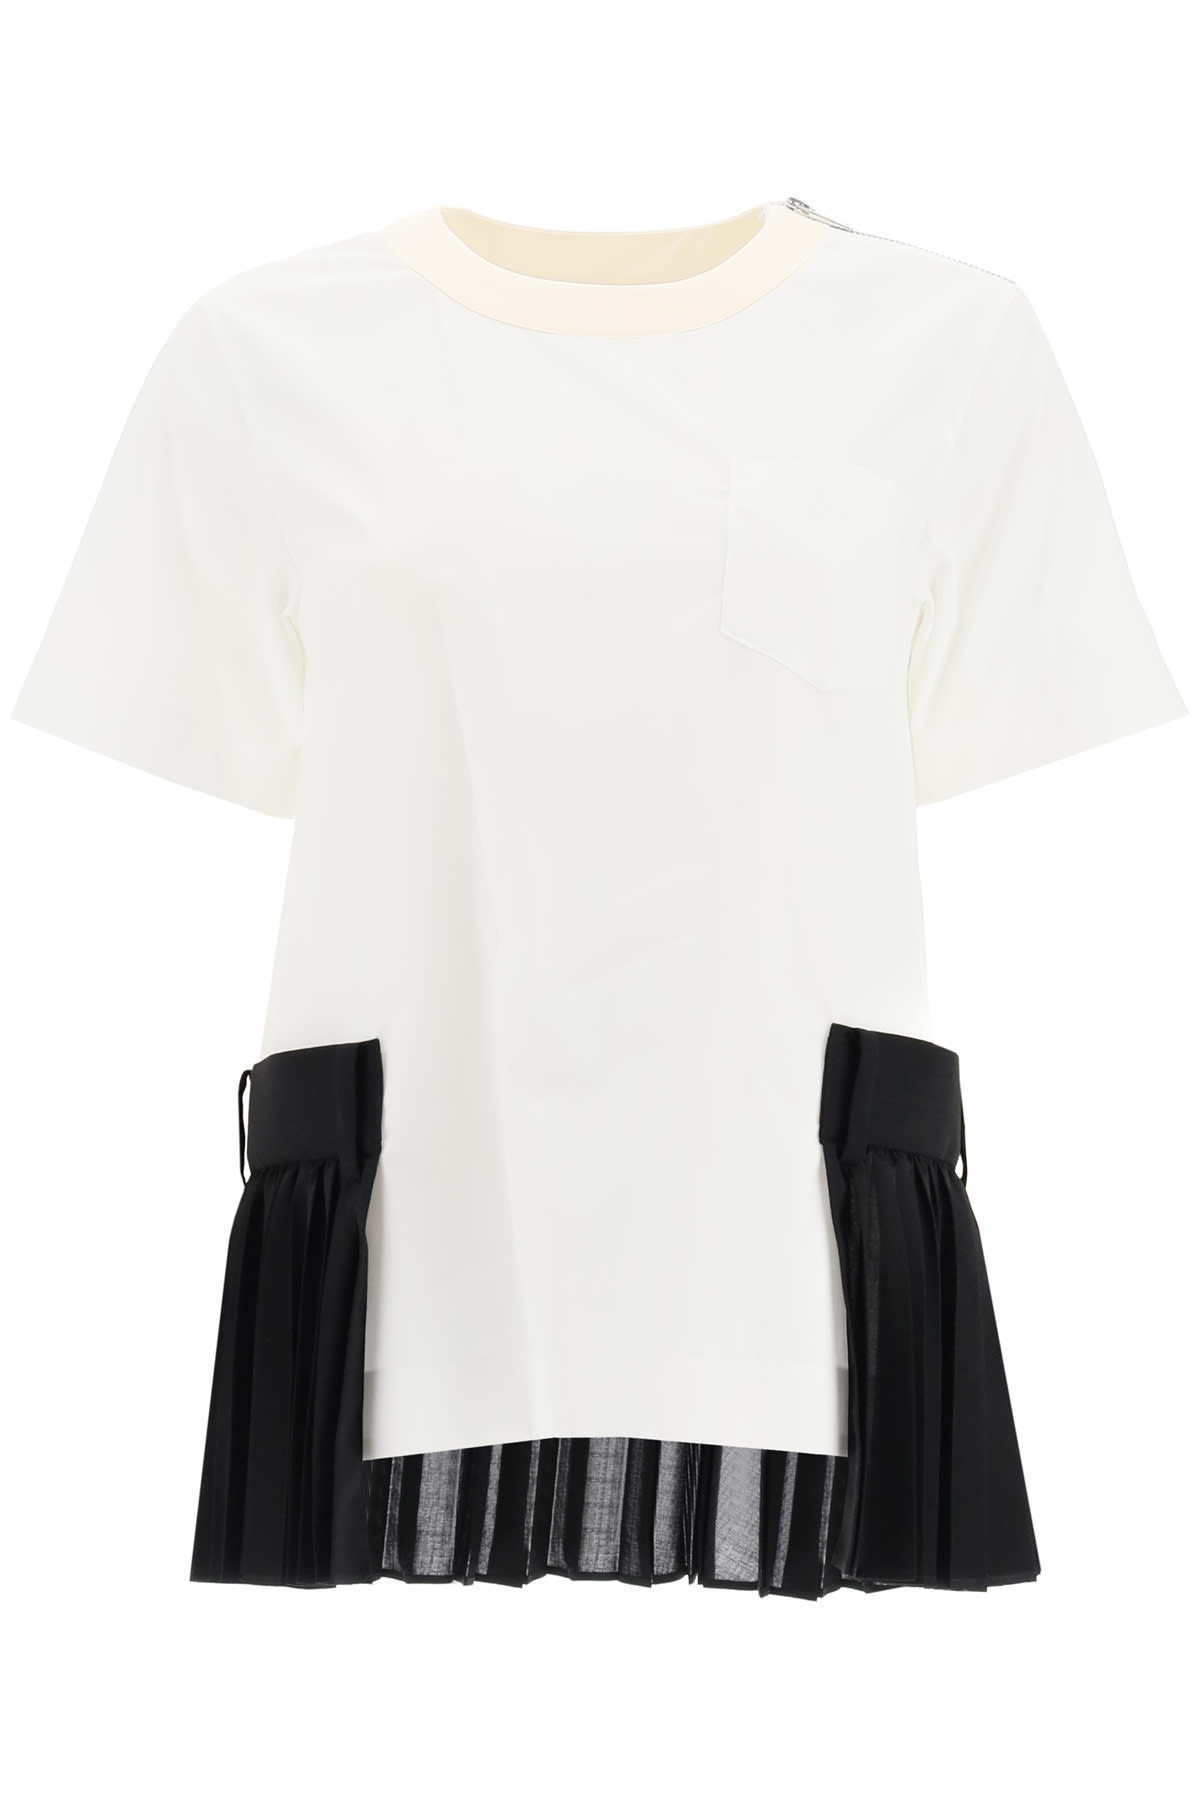 Sacai Top With Pleated Inserts